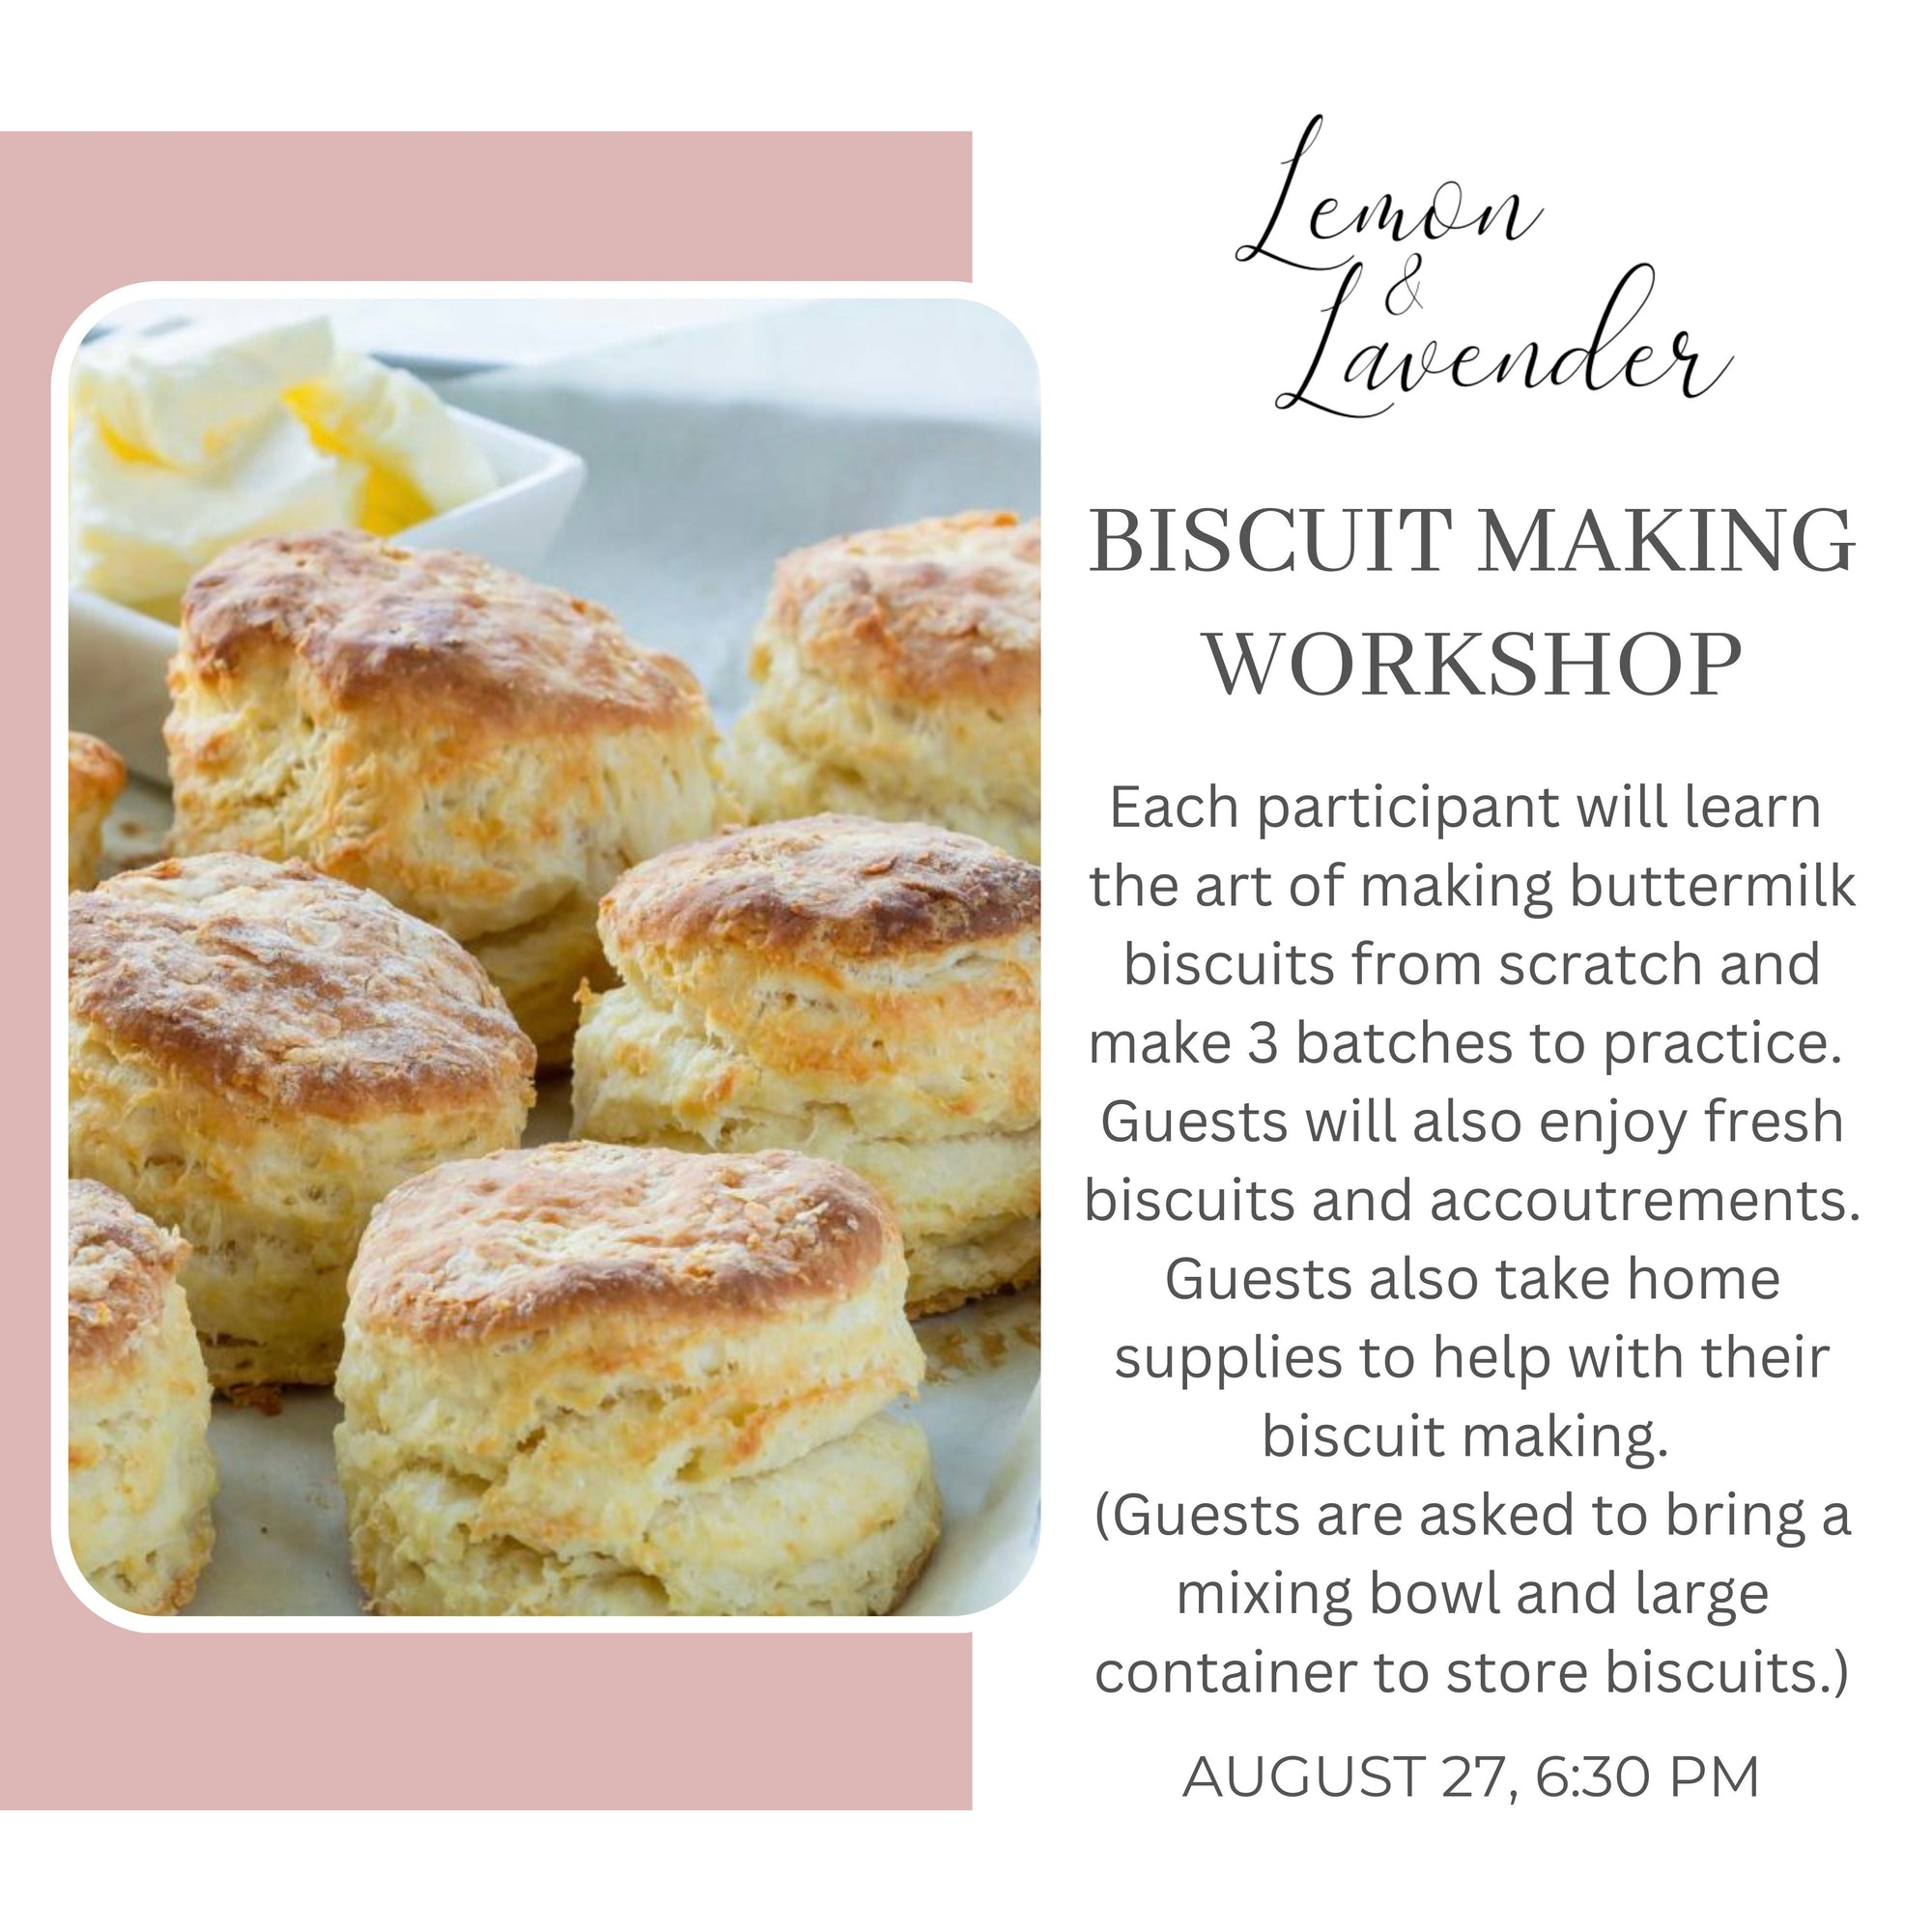 Biscuit Making Workshop - August 27th 6:30 pm